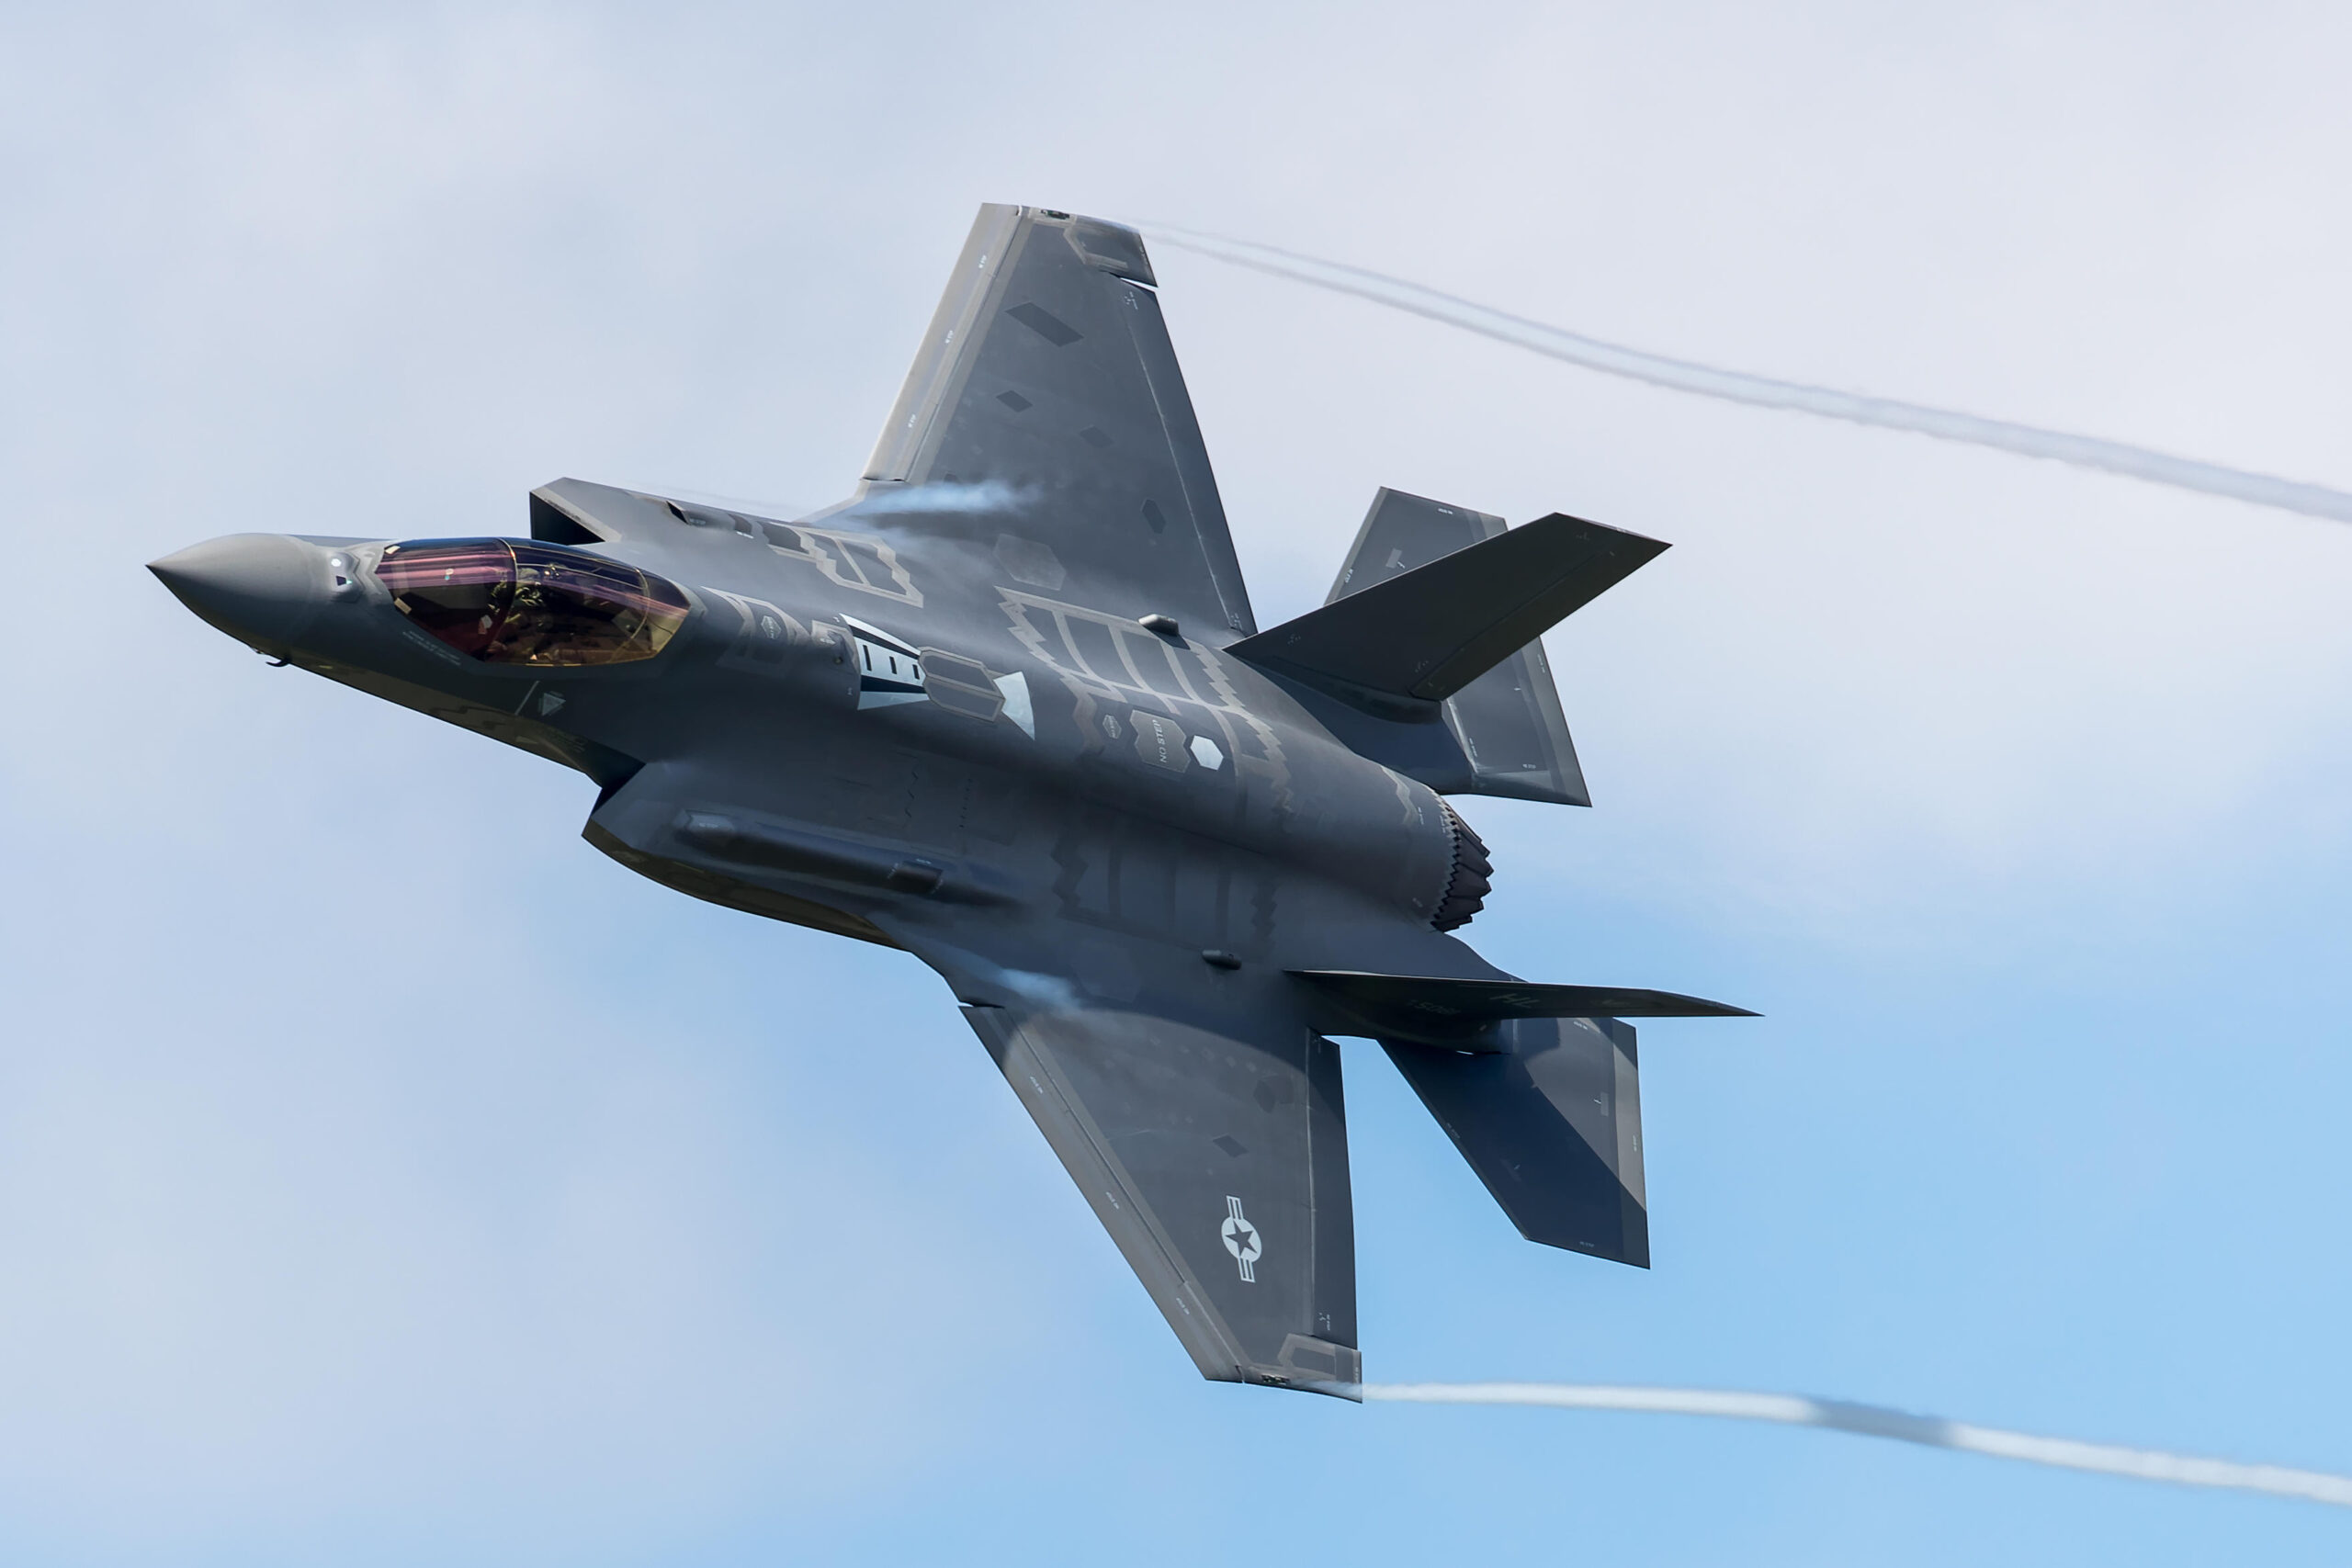 Lockheed Martin Awards Contract to Aechelon Technology for Thirty-Two (32) F-35 Full Mission Simulator Training Systems